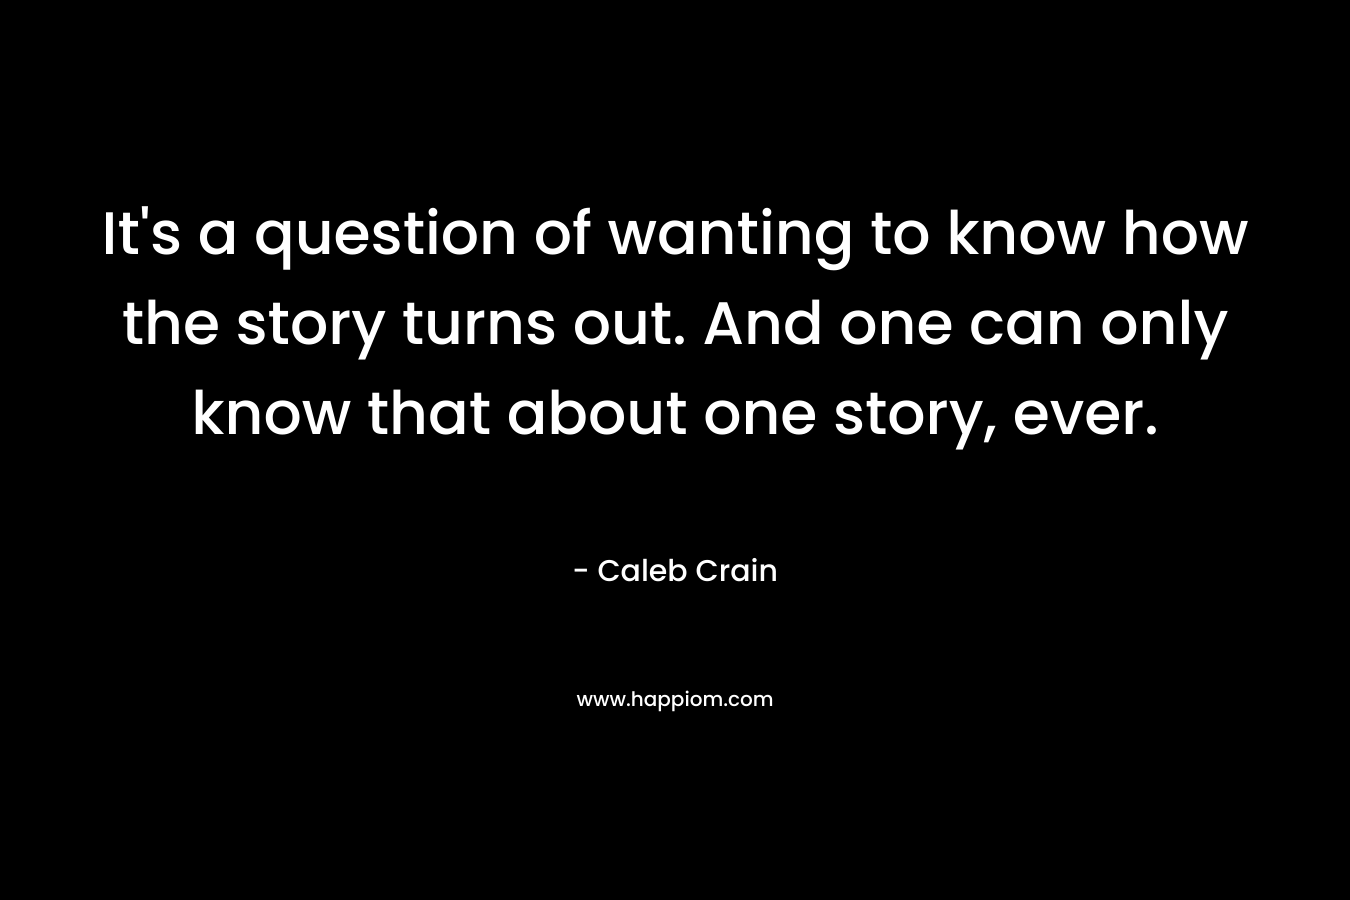 It’s a question of wanting to know how the story turns out. And one can only know that about one story, ever. – Caleb Crain